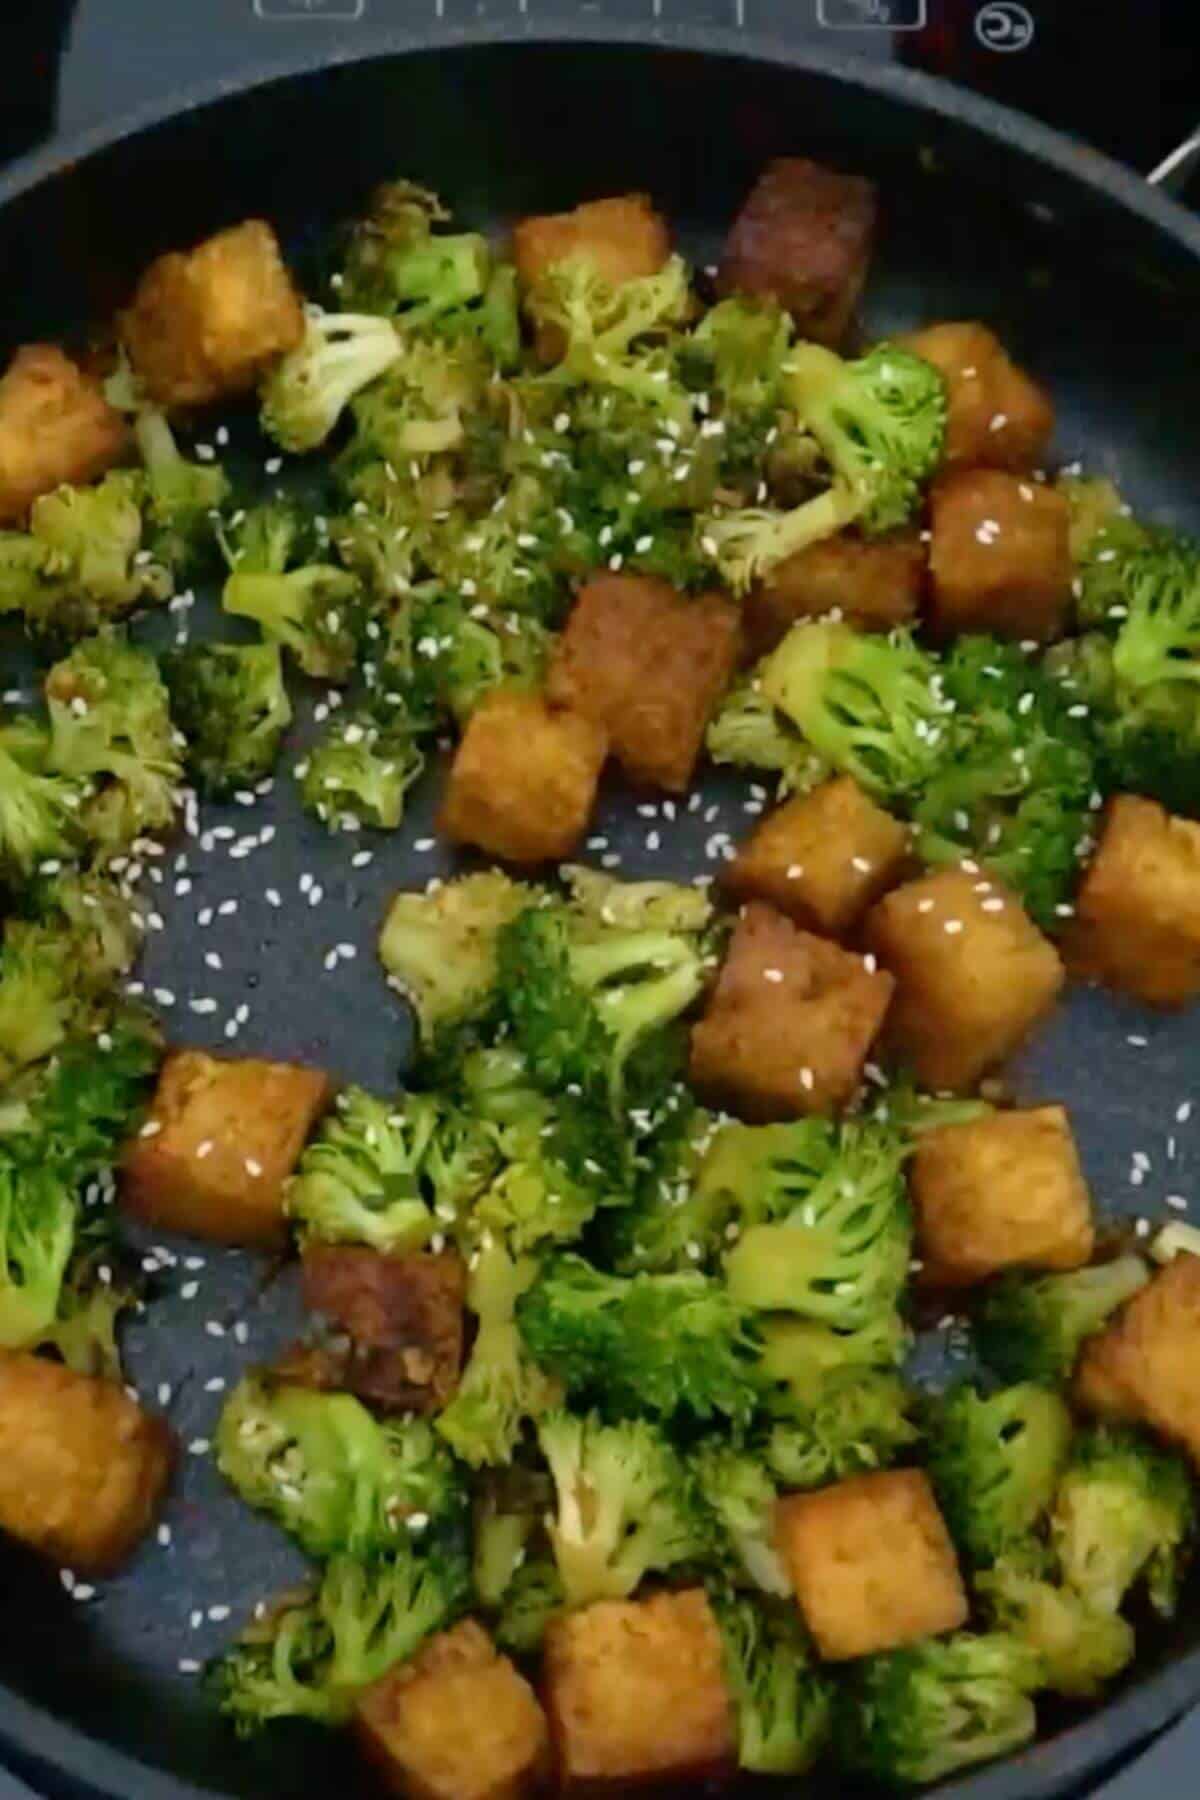 A frying pan with broccoli and tofu.